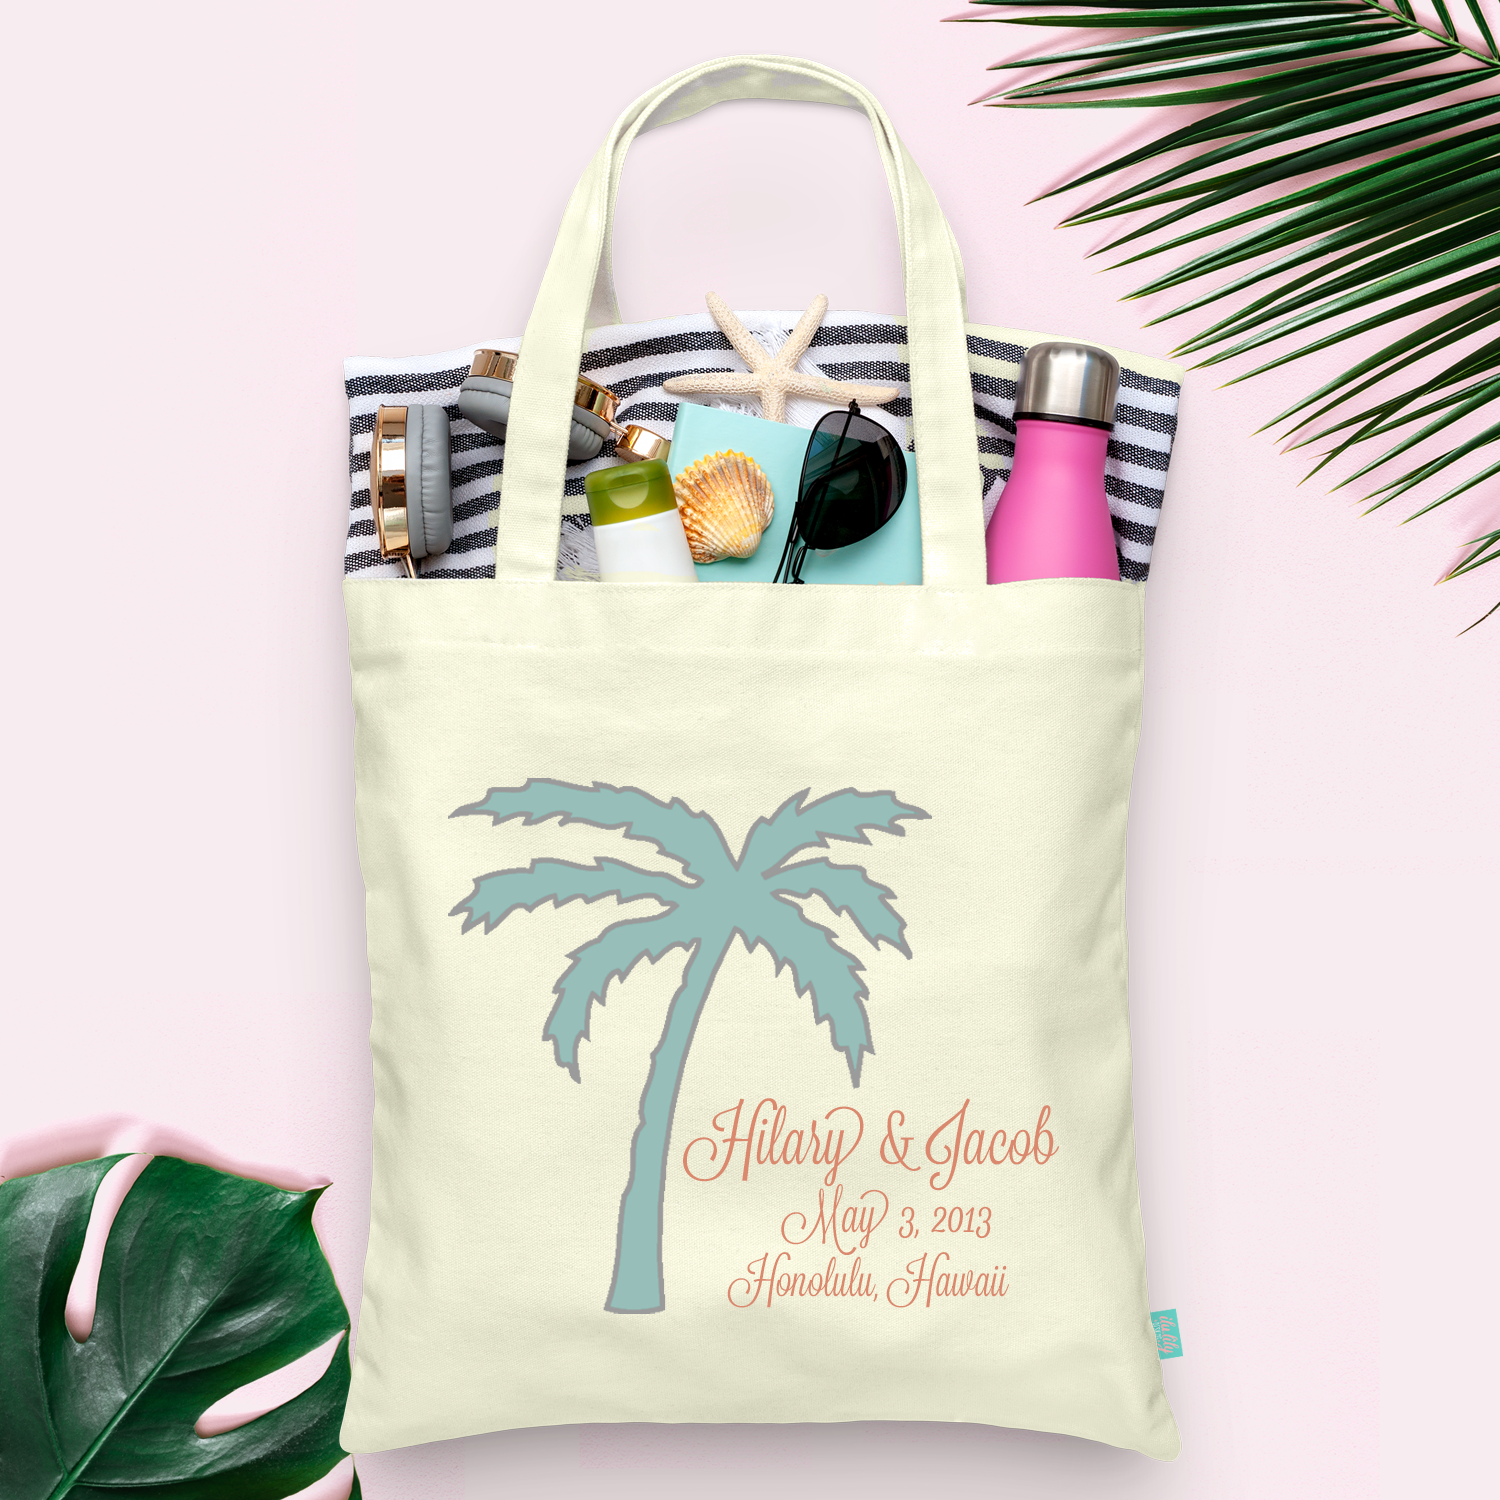 Destination wedding beach bags, personalized wedding welcome bags